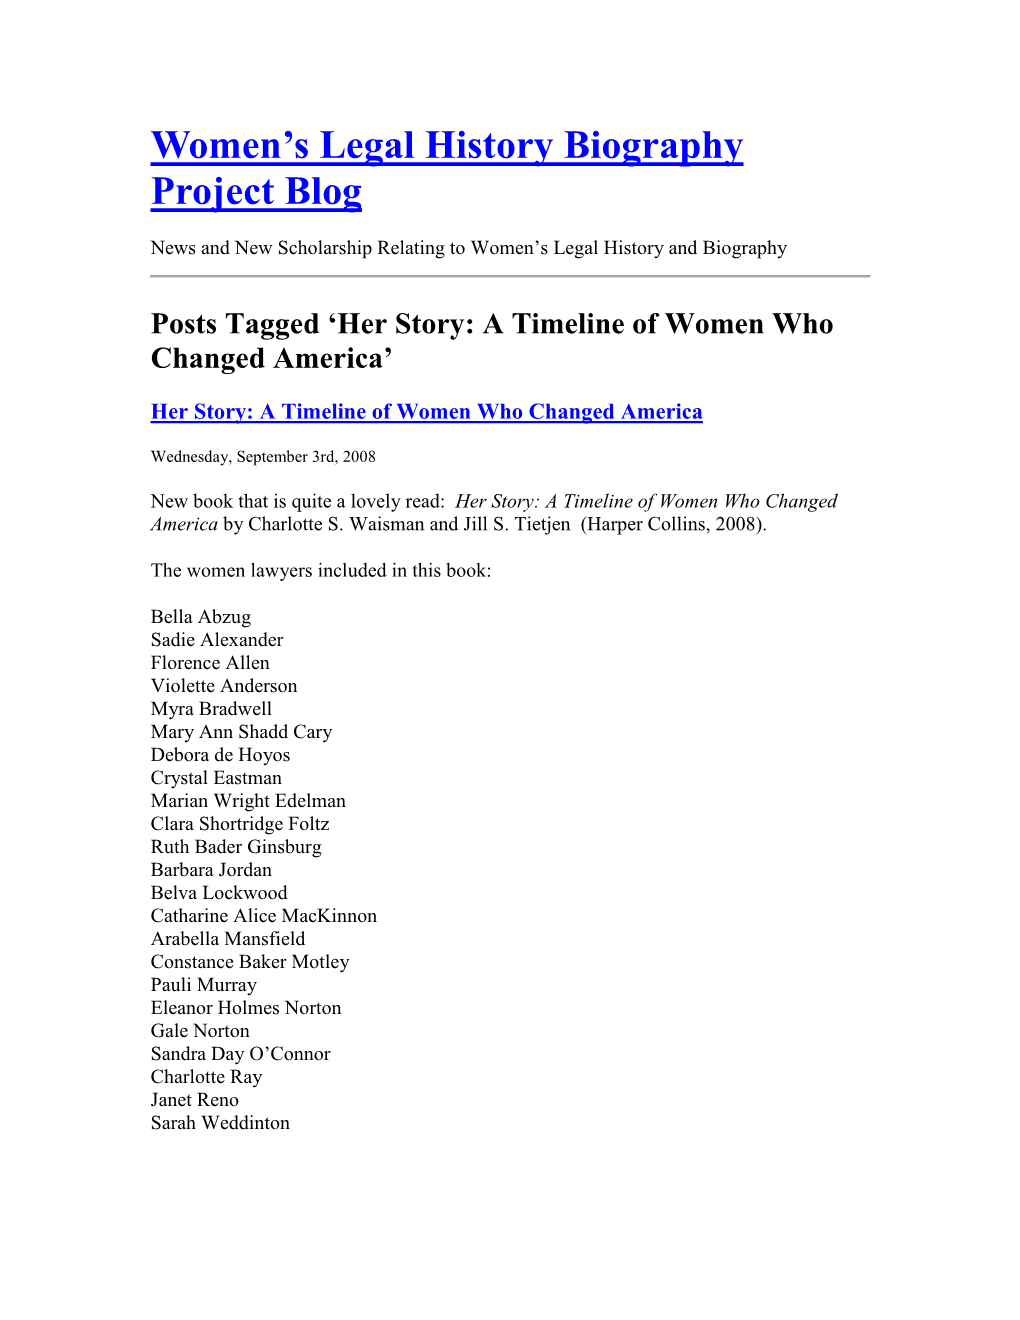 Women's Legal History Biography Project Blog